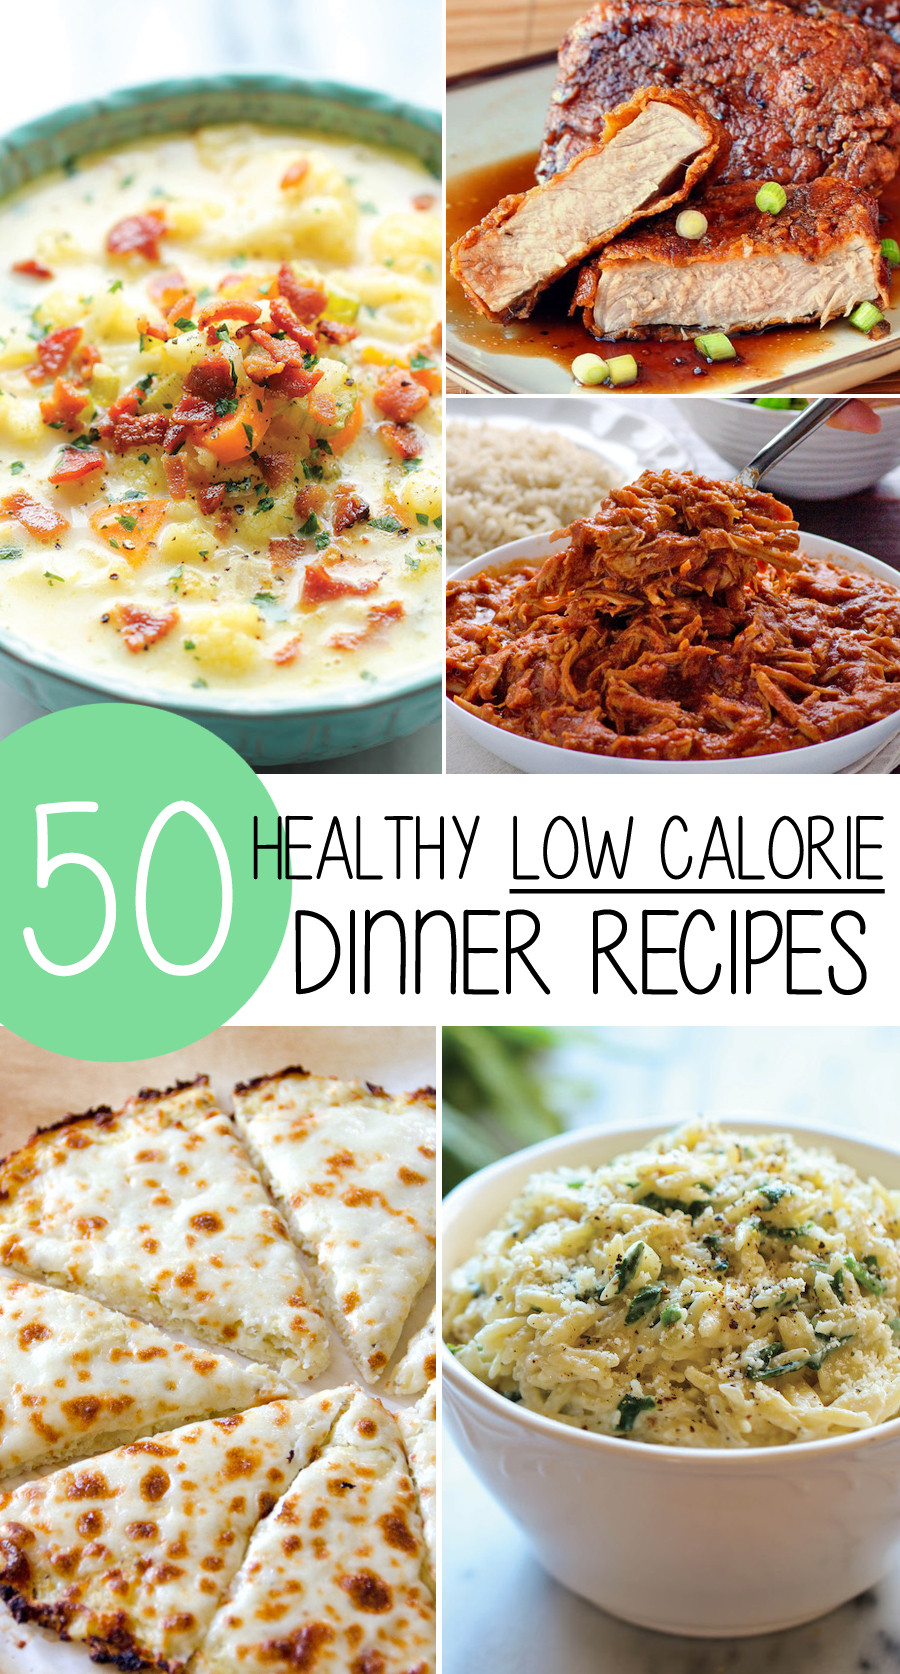 Easy Low Calorie Dinner Recipes
 50 Healthy Low Calorie Weight Loss Dinner Recipes